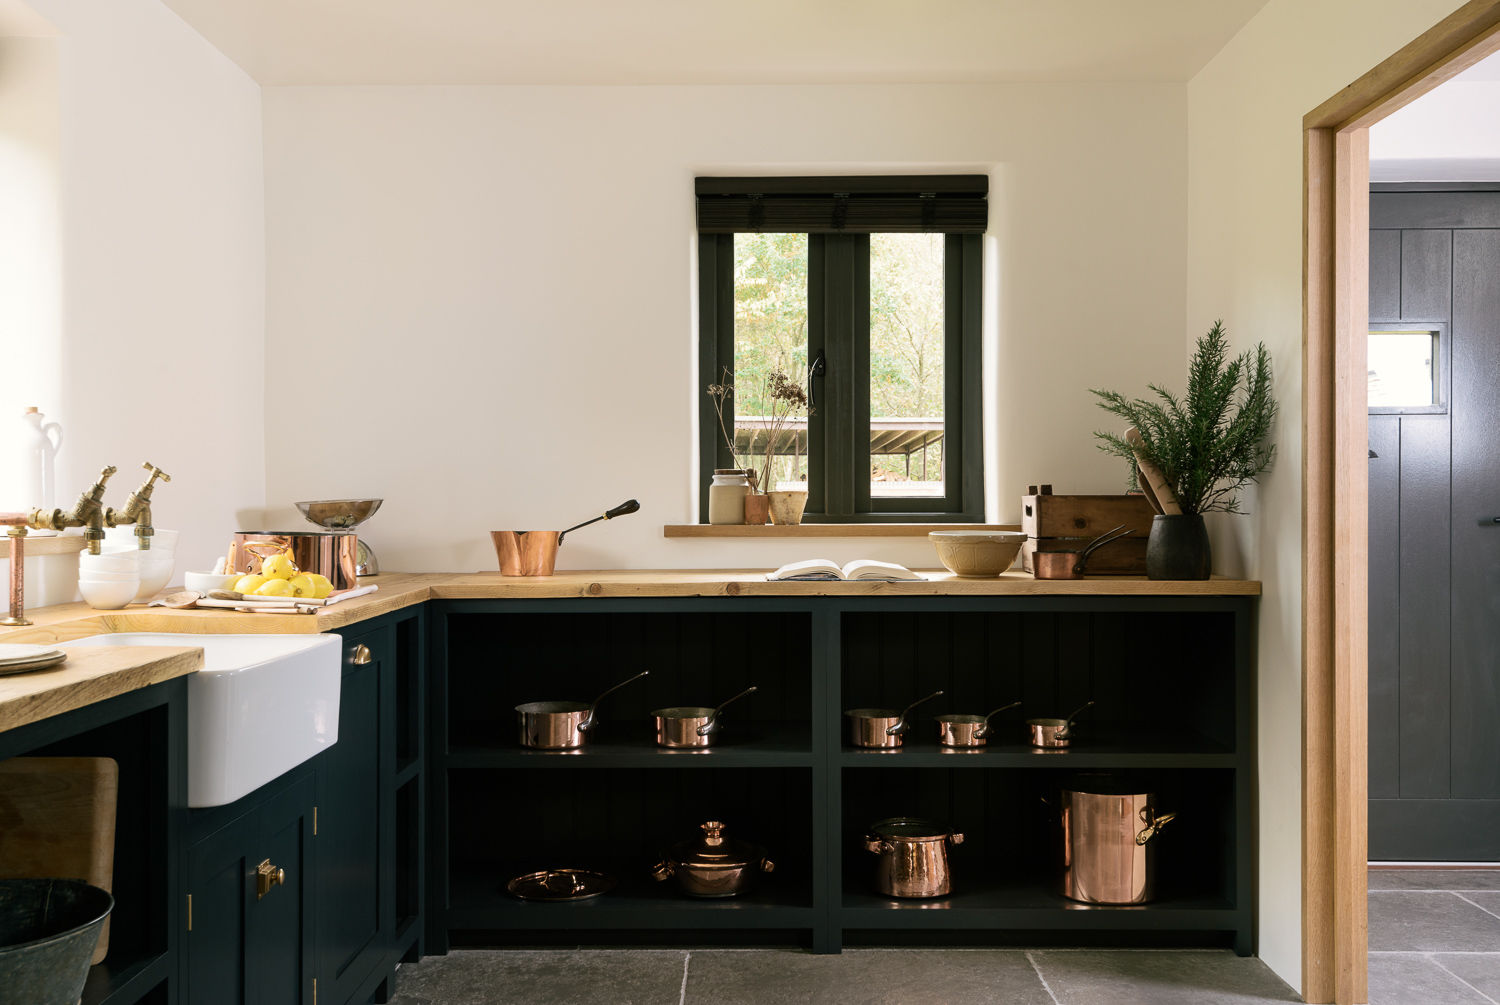 The Leicestershire Kitchen in the Woods by deVOL deVOL Kitchens Country style kitchen